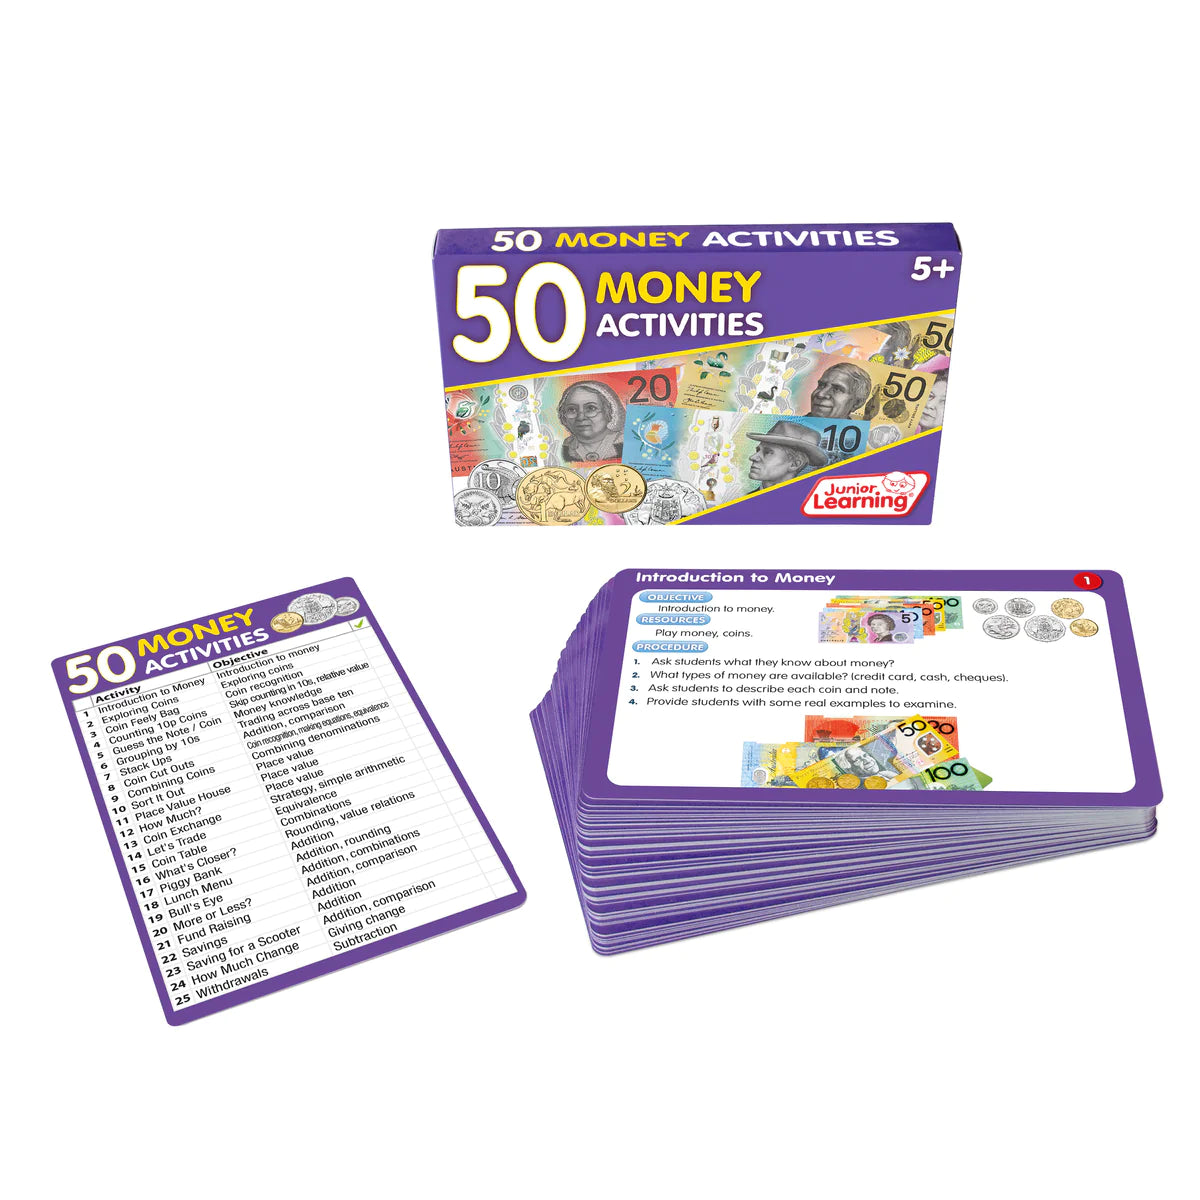 50 Money Activities By Junior Learning